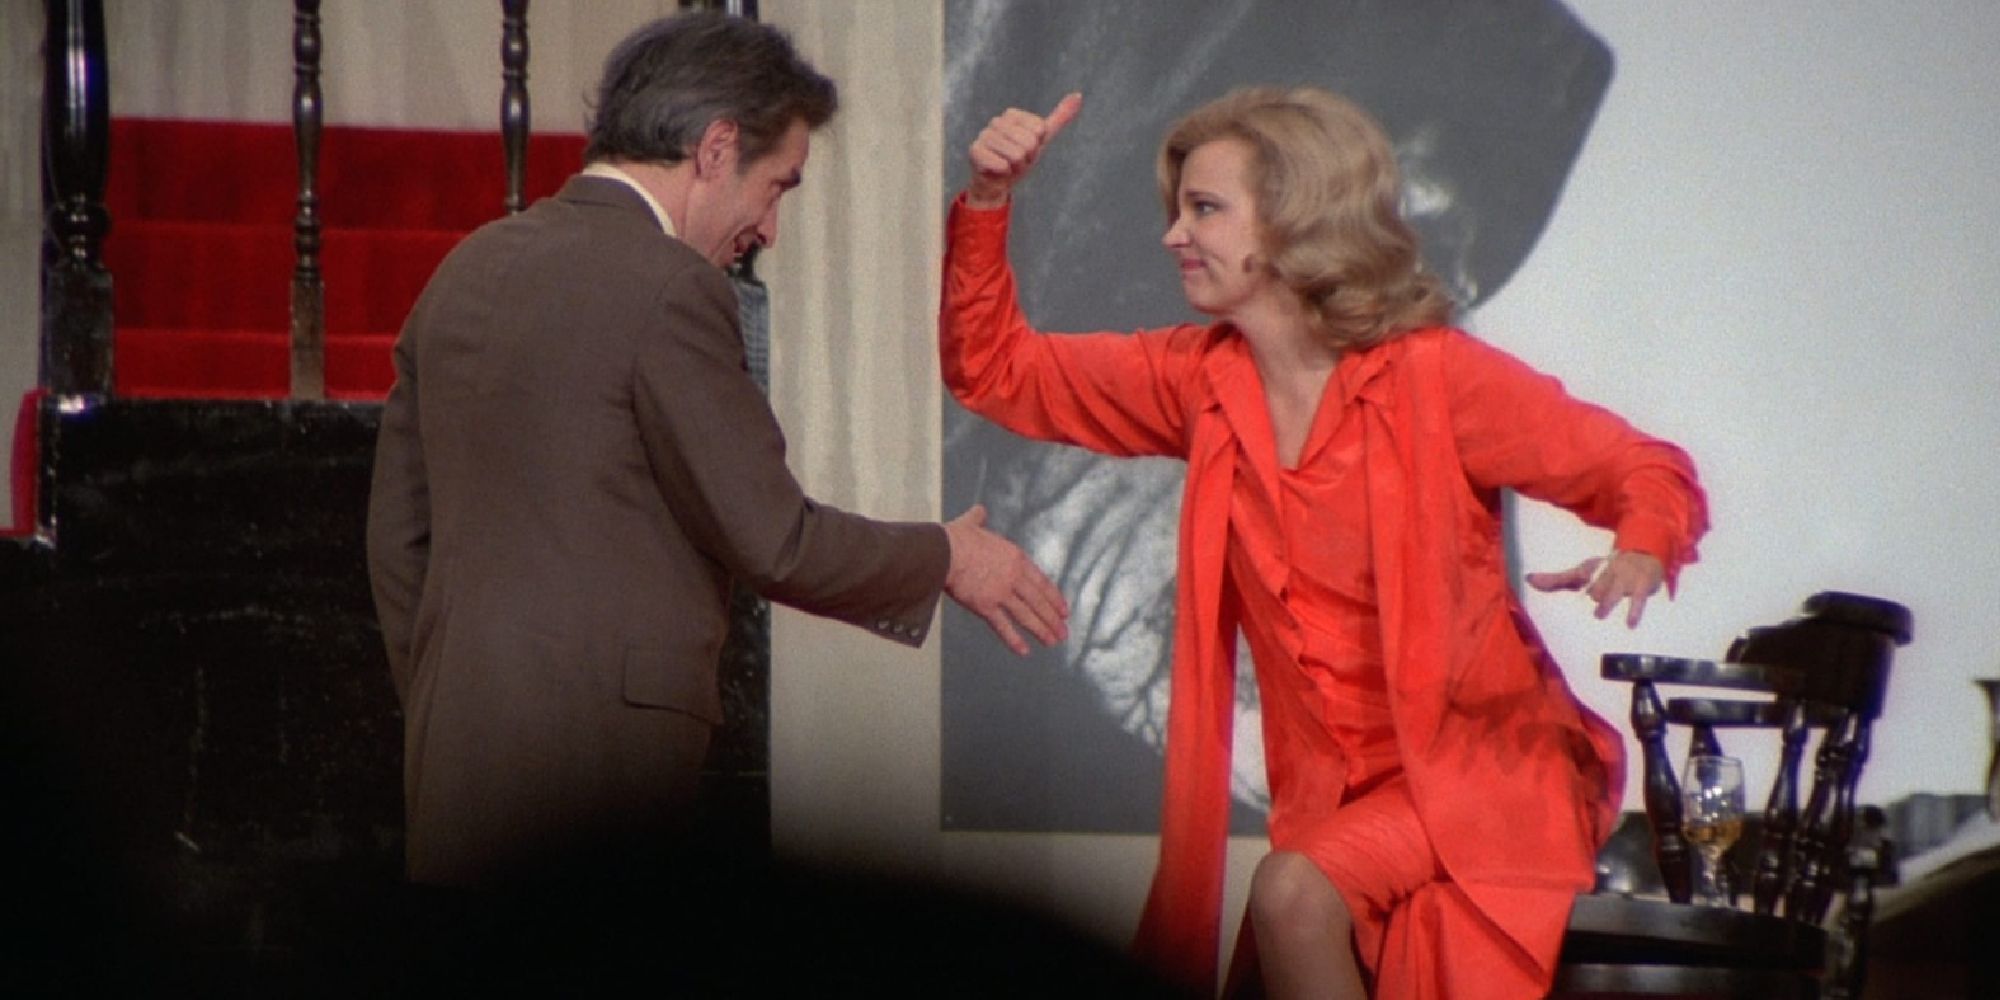 John Cassavetes and Gena Rowlands as Maurice and Myrtle dancing and laughing in the film Opening Night